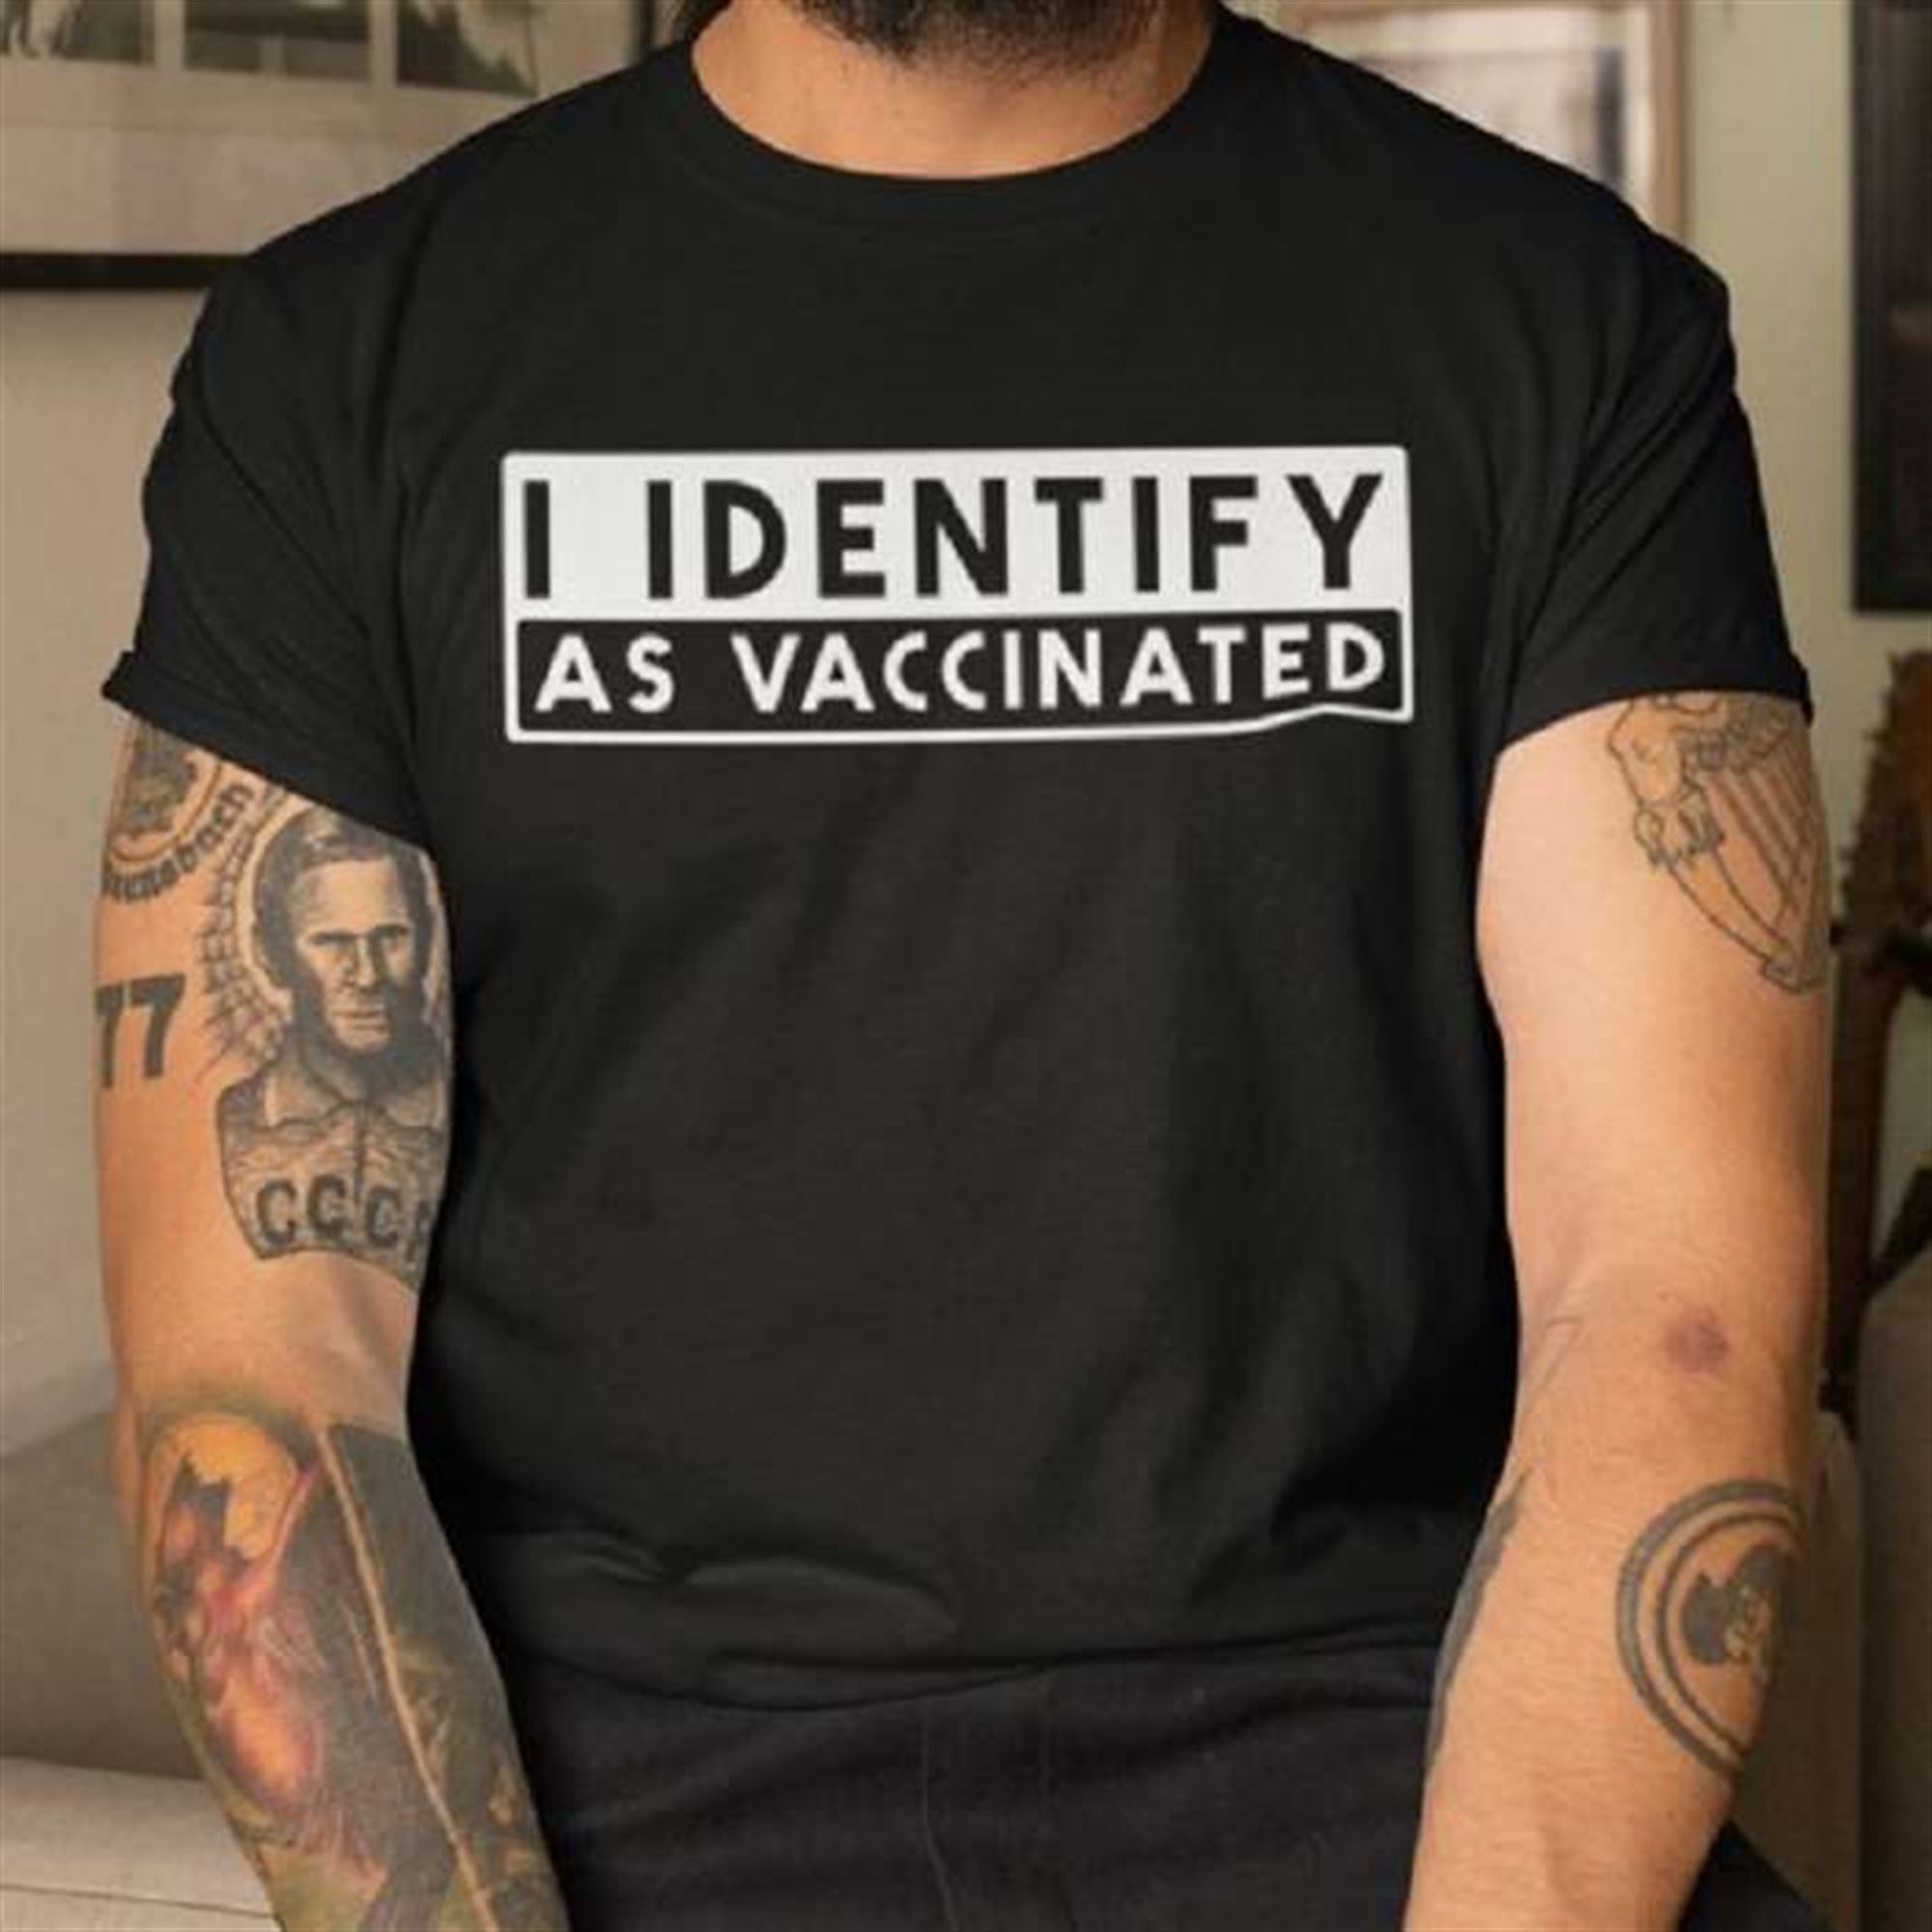 I Identify As Vaccinated T-shirt Full Size Up To 5xl